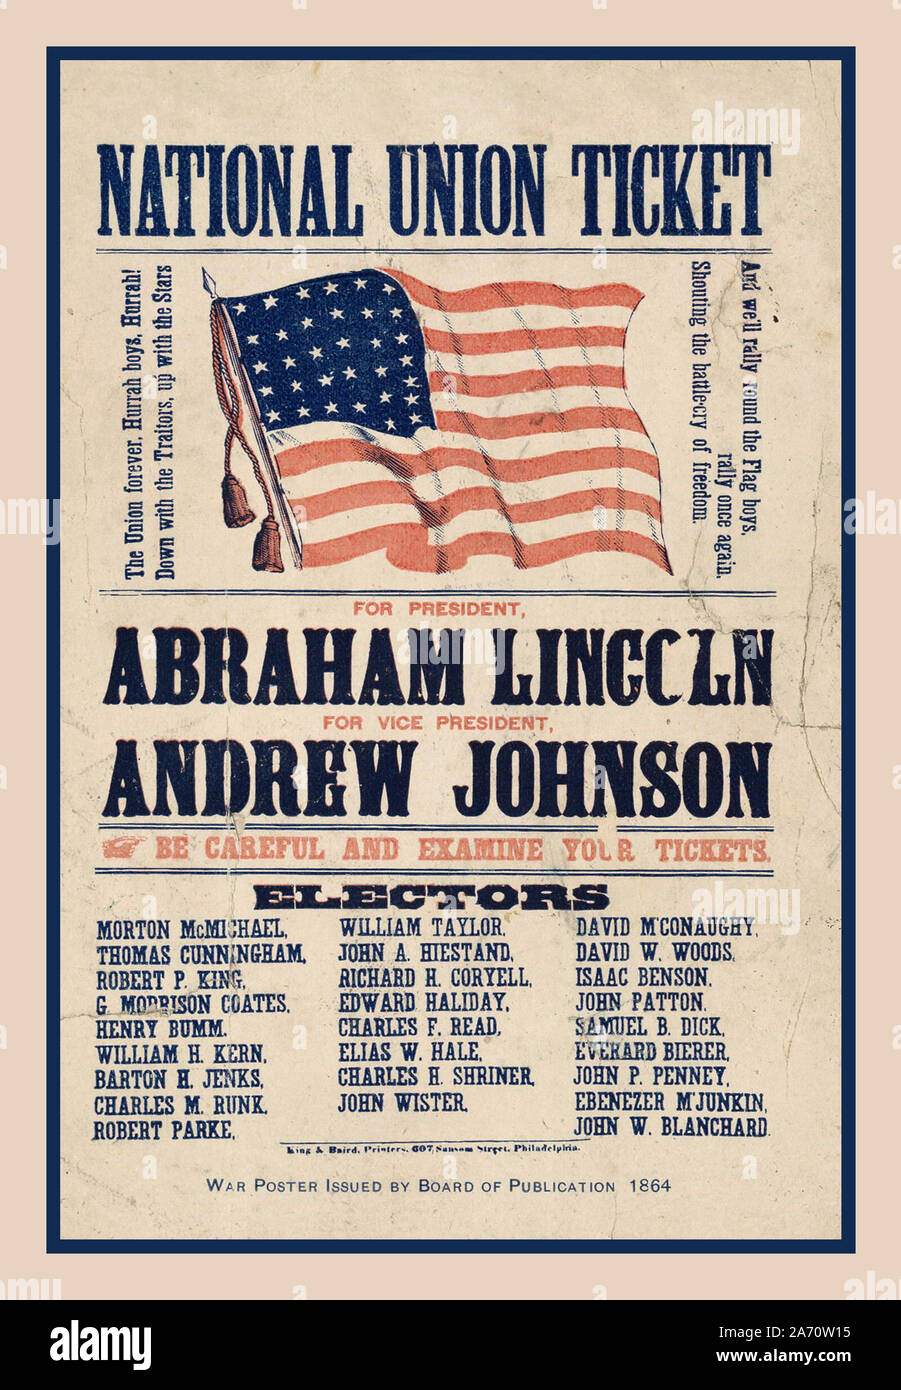 Vintage 1864 American Presidential Campaign Poster National Union Ticket  Election poster - 1864 USA Presidential Poster Abraham Lincoln and Andrew Johnson  Republican Party War Poster issued by Board of Publication 1864 USA Stock Photo